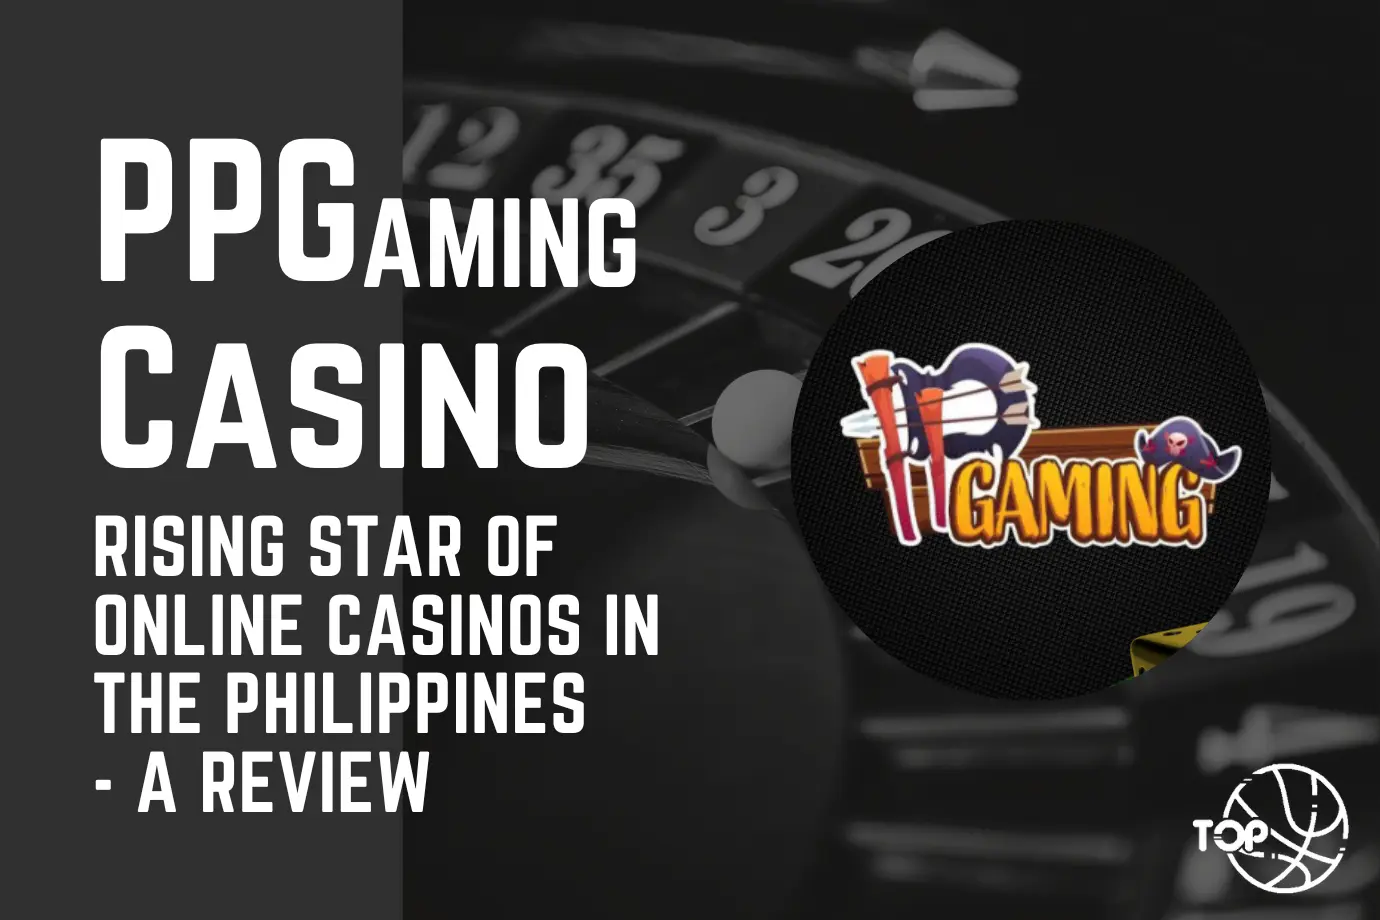 PPGaming: Rising Star of Online Casinos in the Philippines - A Review